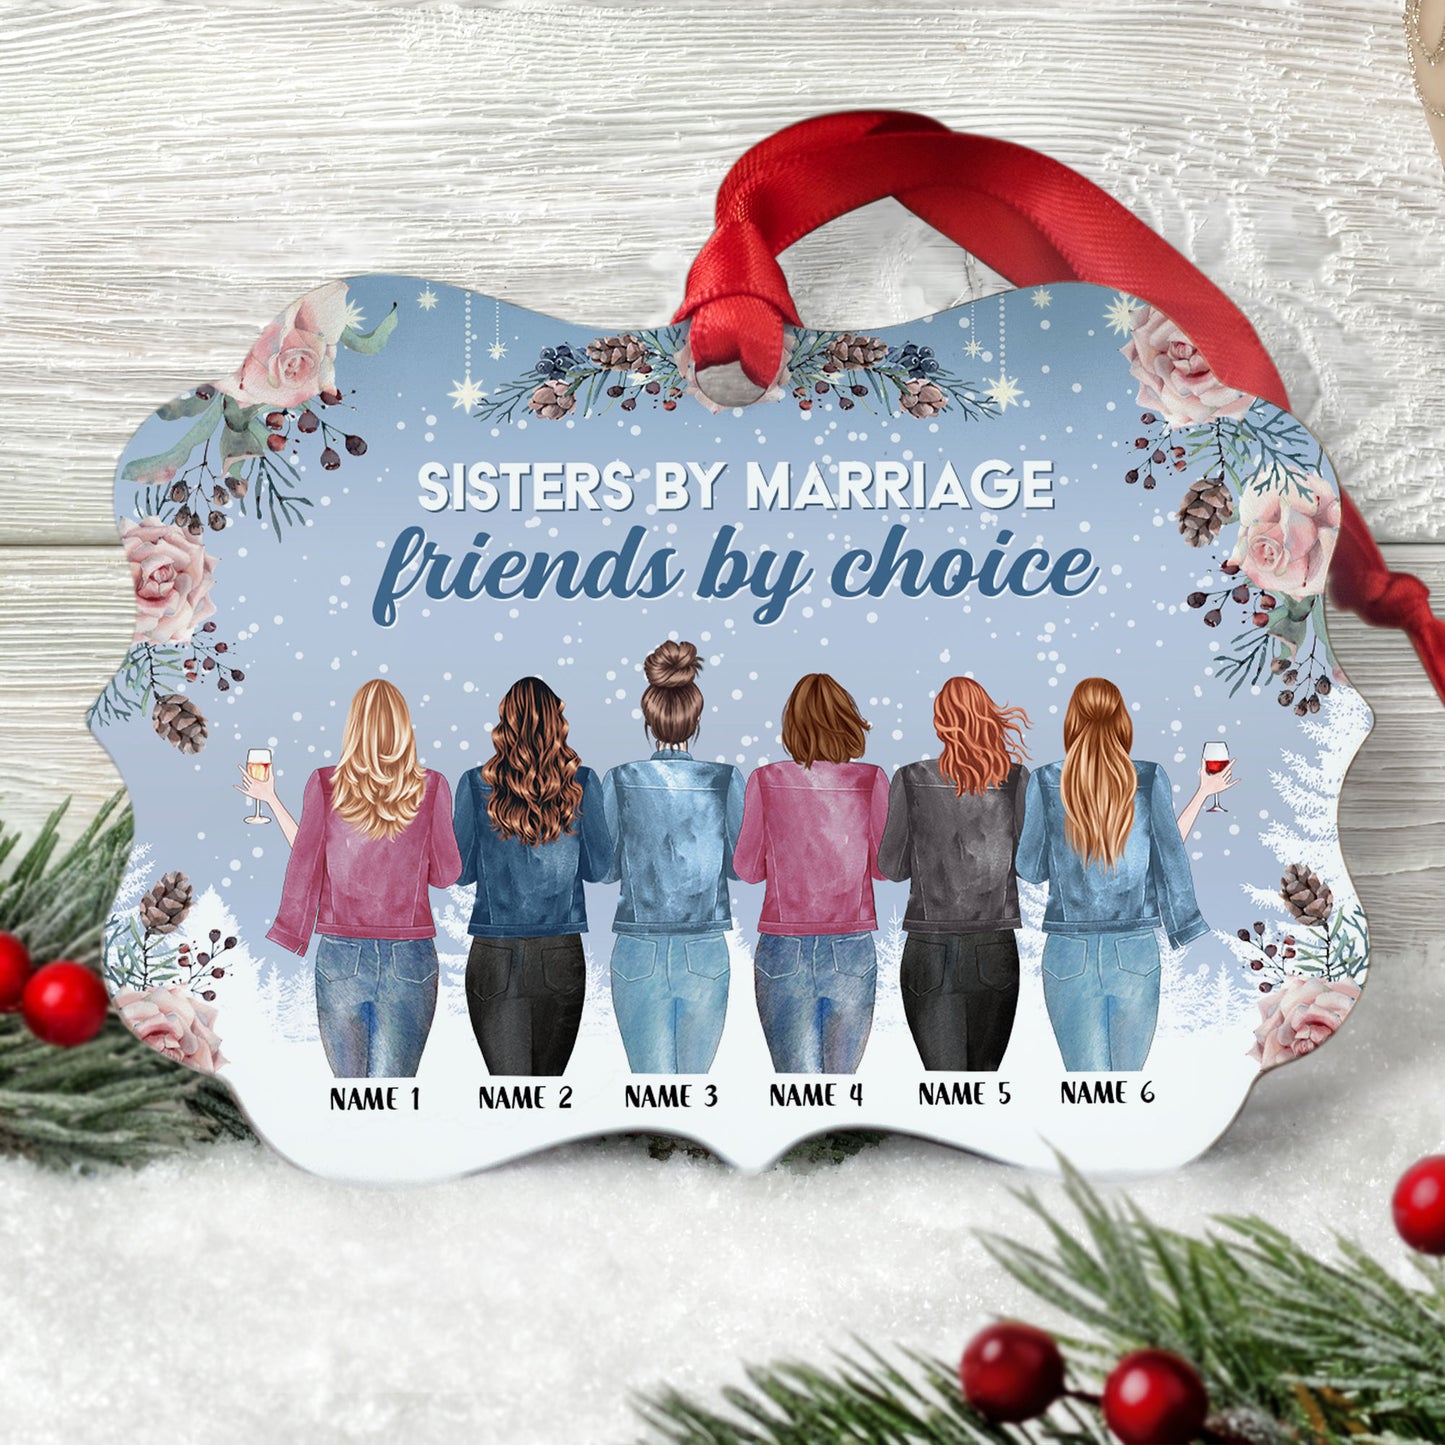 Sisters By Marriage Friends By Choice - Personalized Aluminum Ornament - Christmas Gift For Sisters-in-law